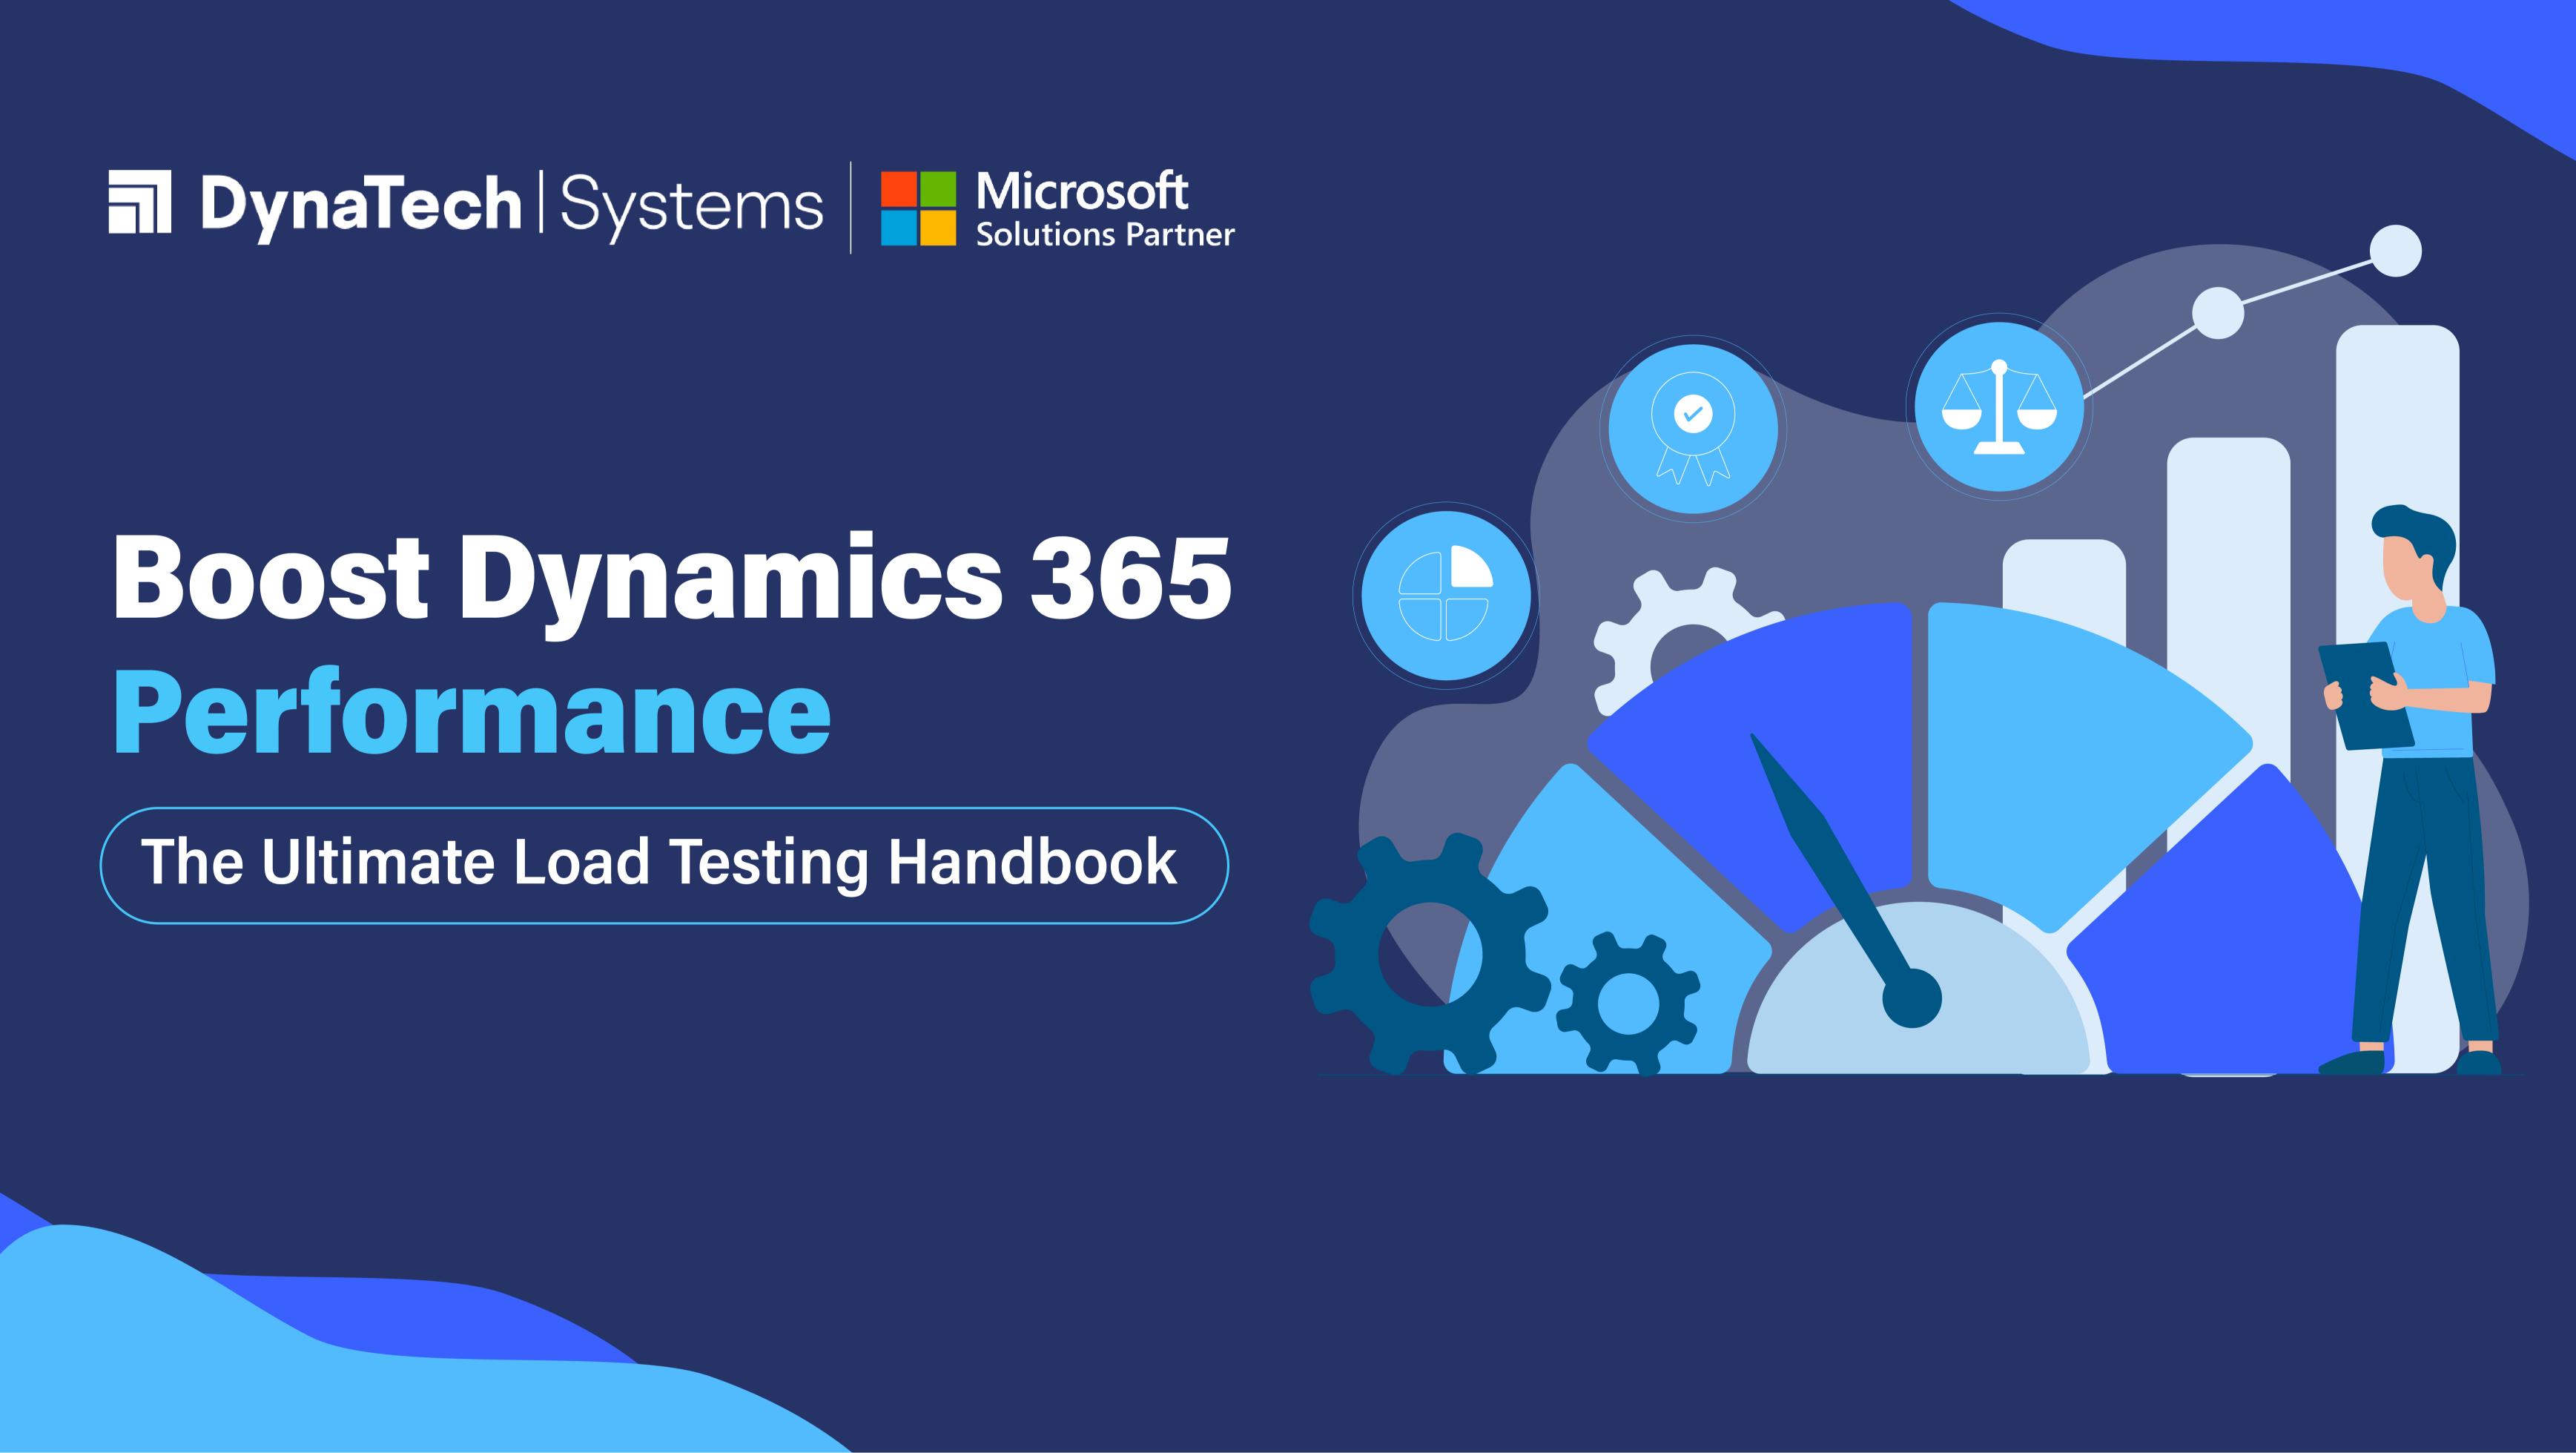 A Comprehensive Guide on How to Set Up and Run Load Tests for Your Dynamics 365 Implementation Projects